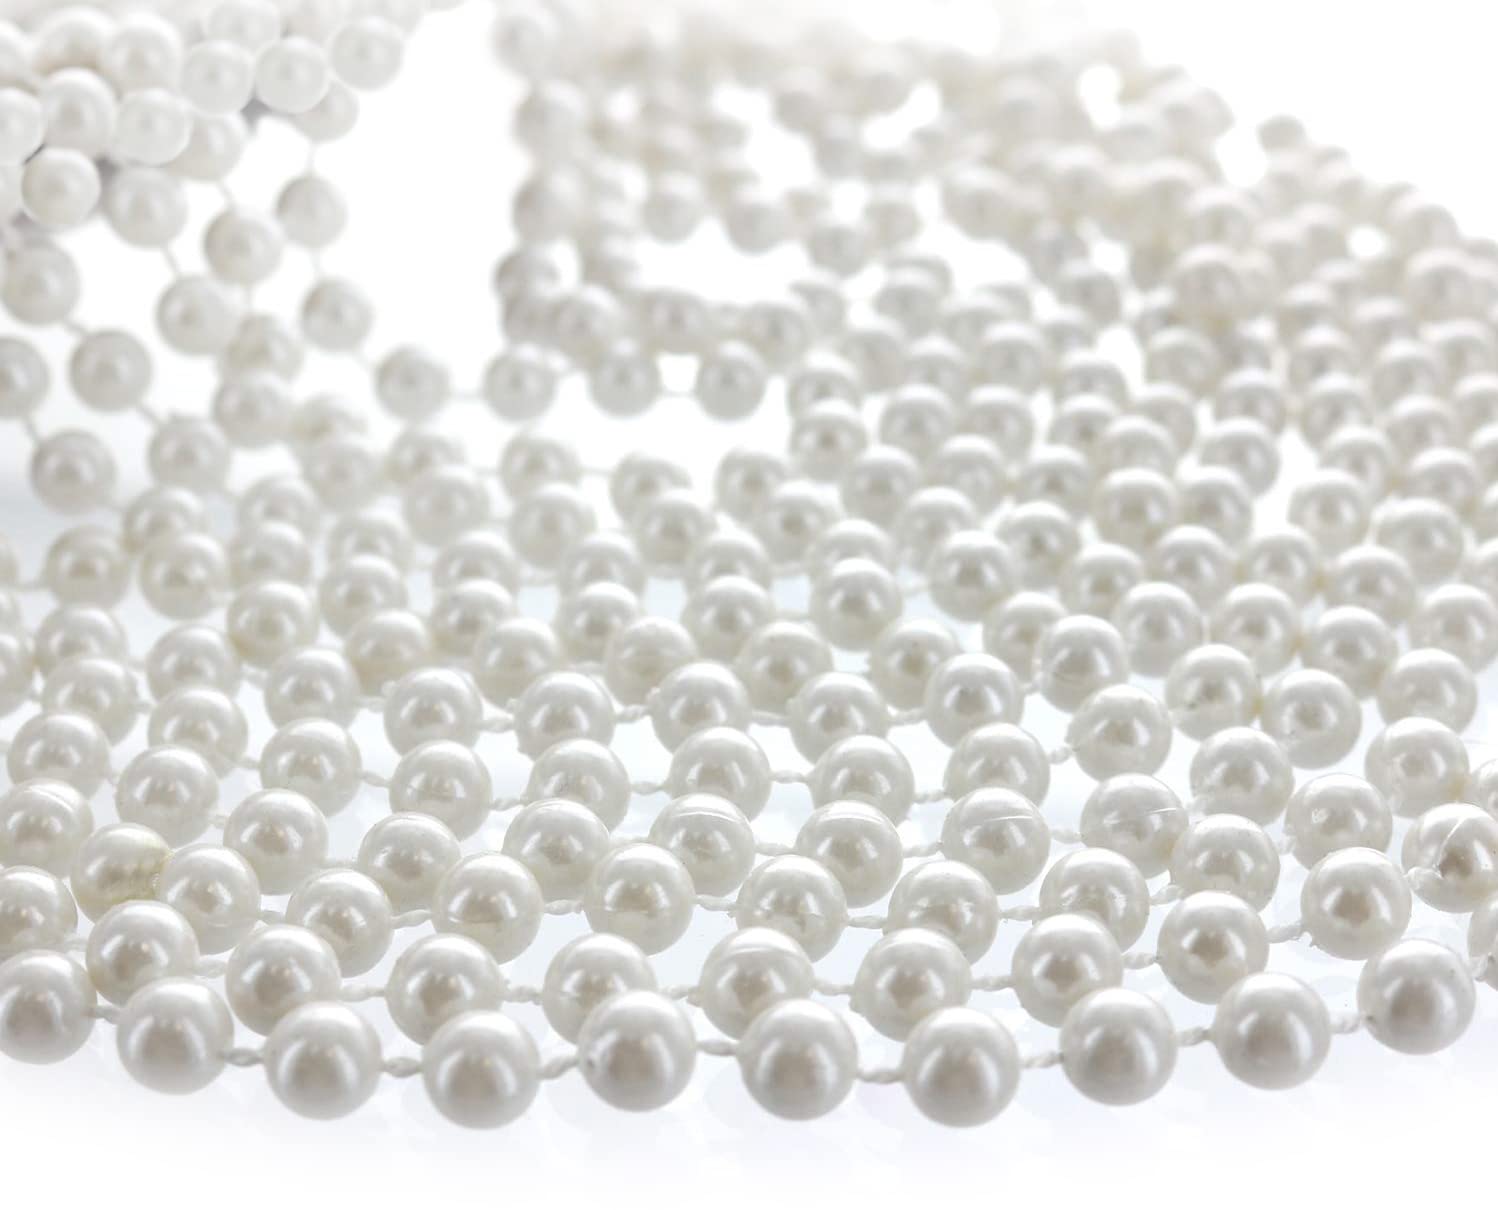 GIFTEXPRESSⓇ 12 PCS White Pearl Bead Necklaces Flapper Beads Party Accessory Party Favor